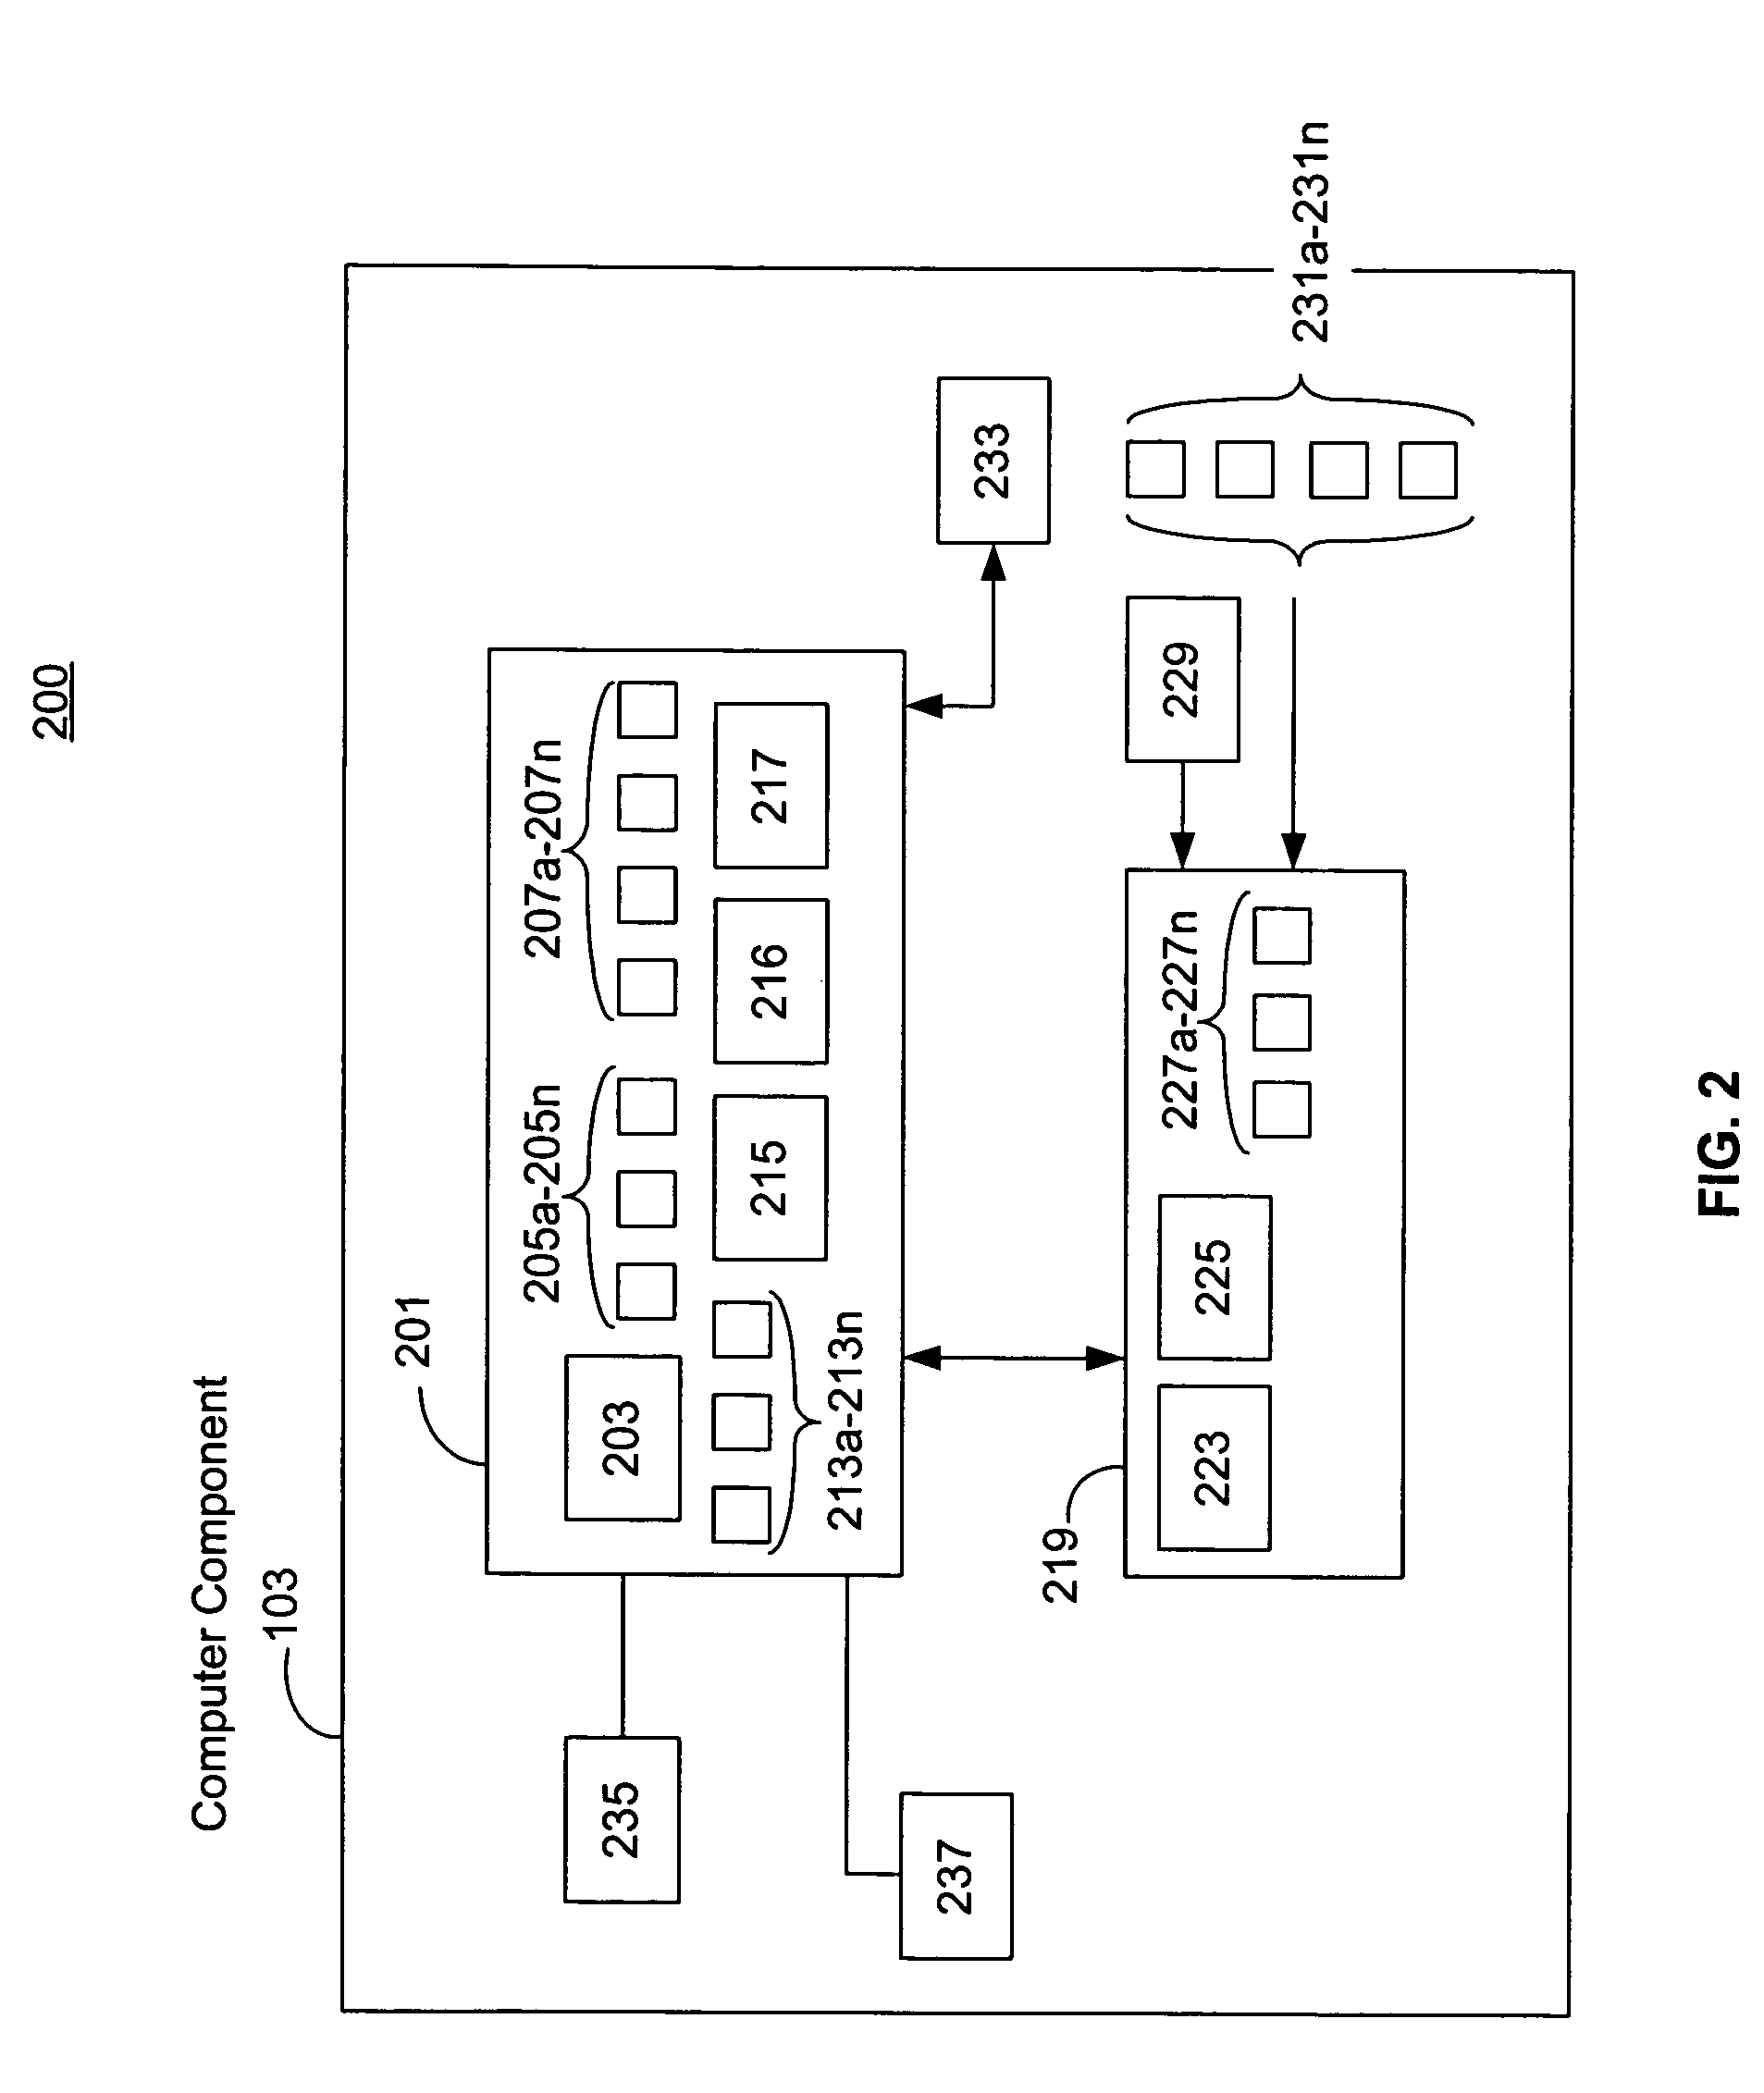 System and method for testing fuel tank integrity